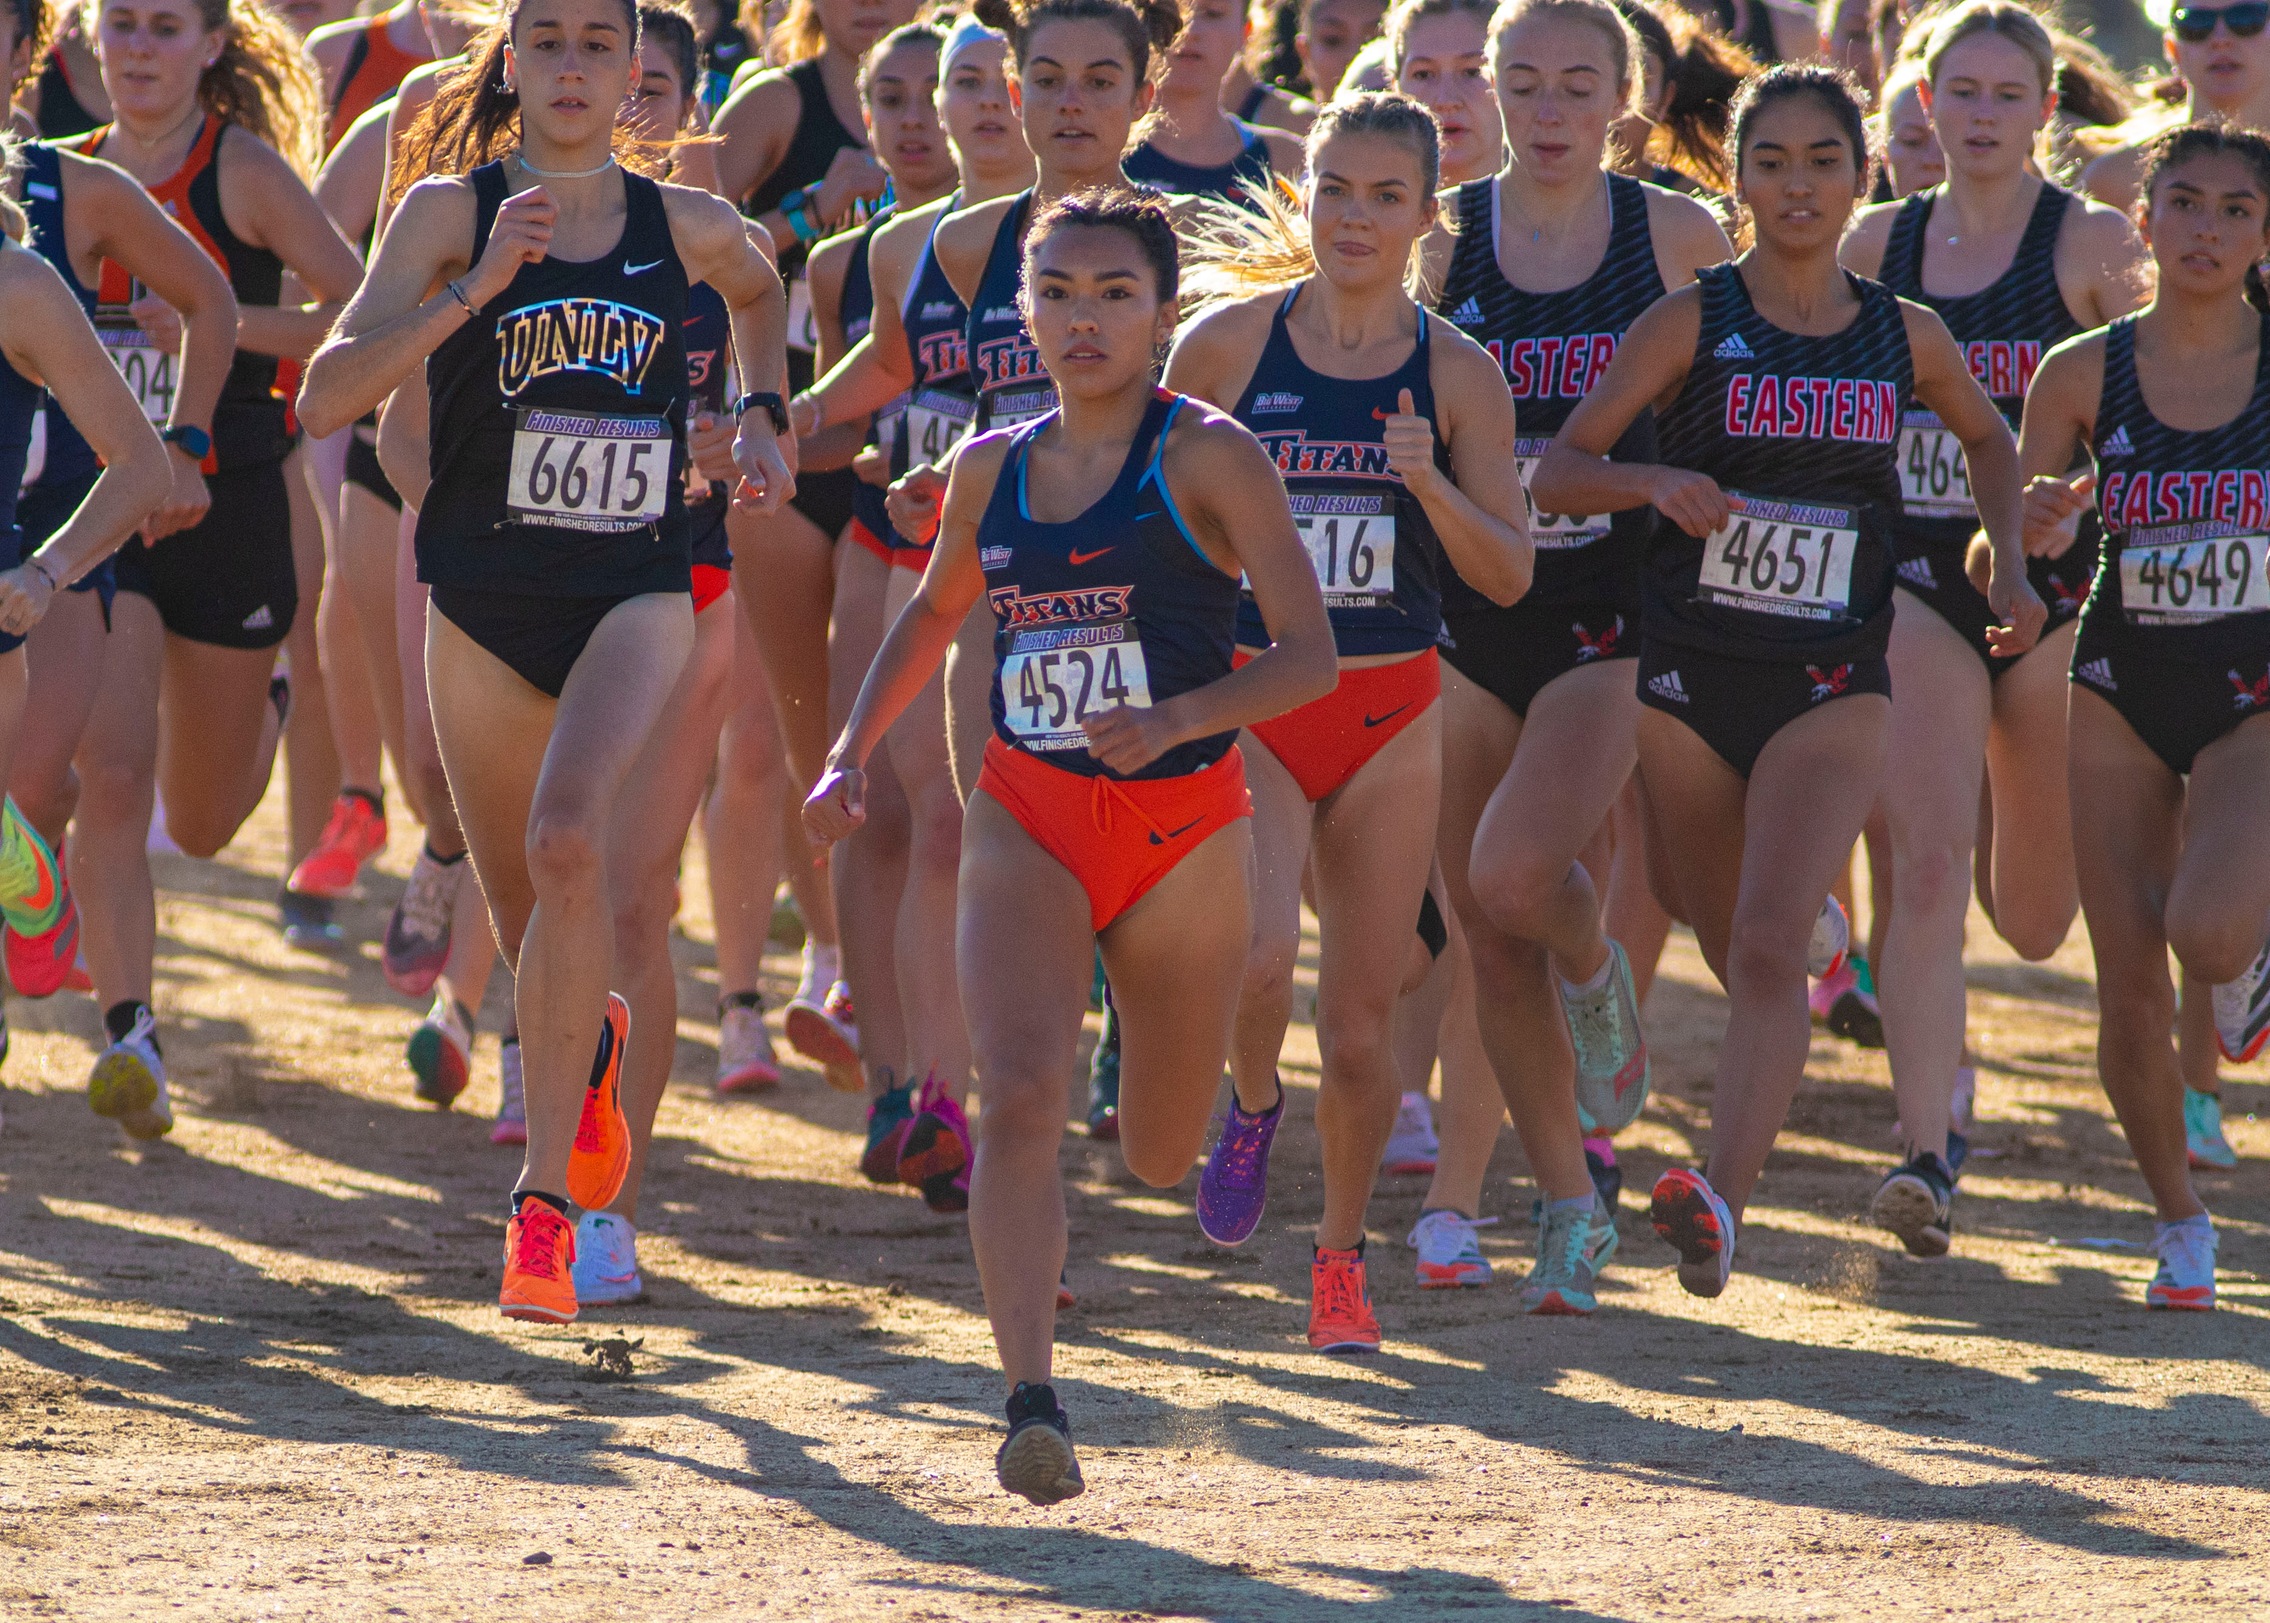 Trinity Ruelas leading the way in the start.